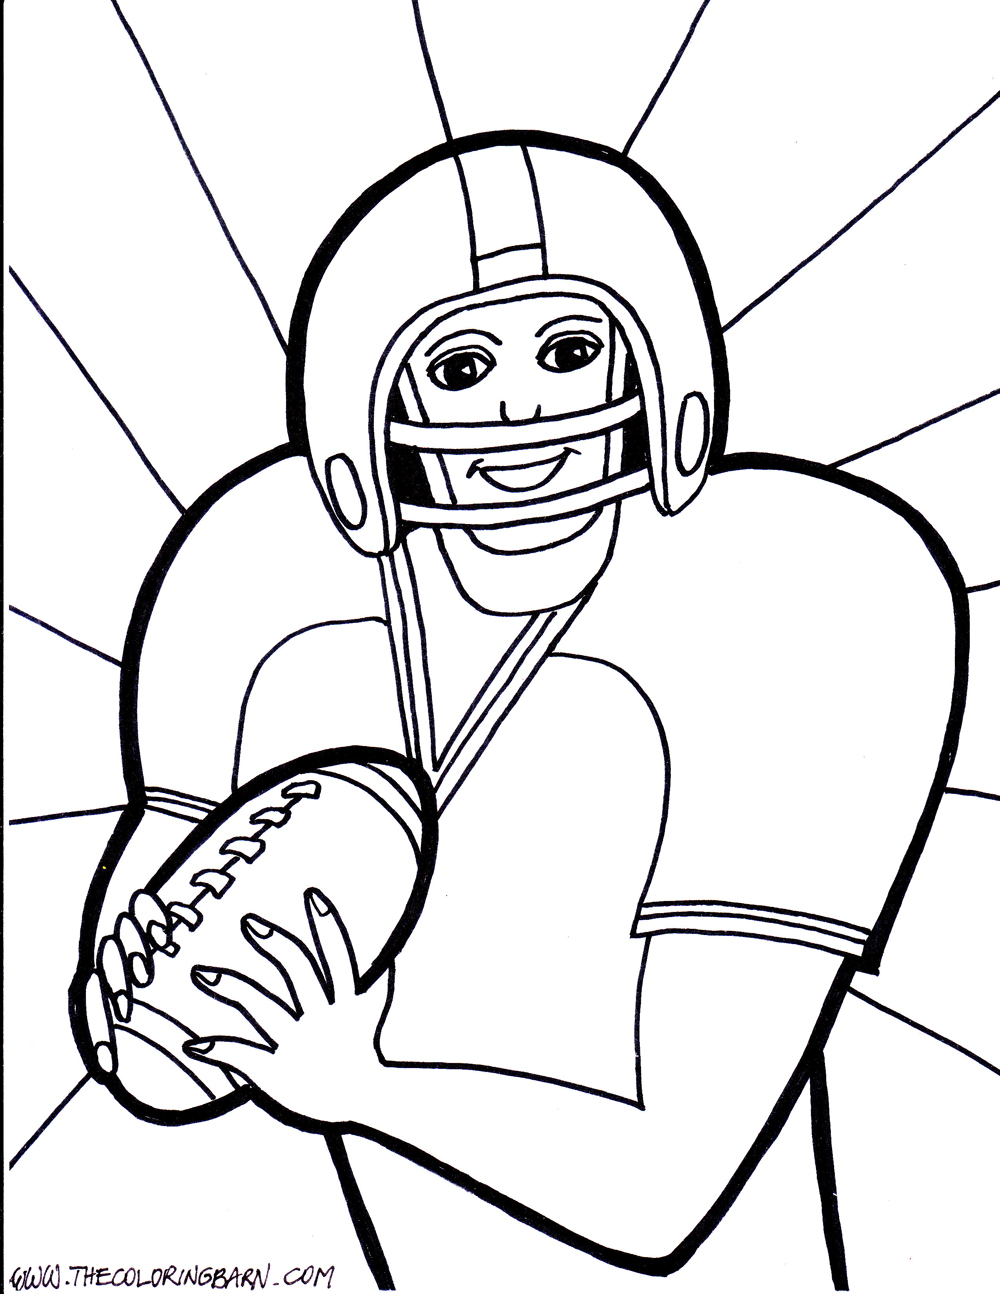 coloring-pages-football-coloring-pages-free-and-printable